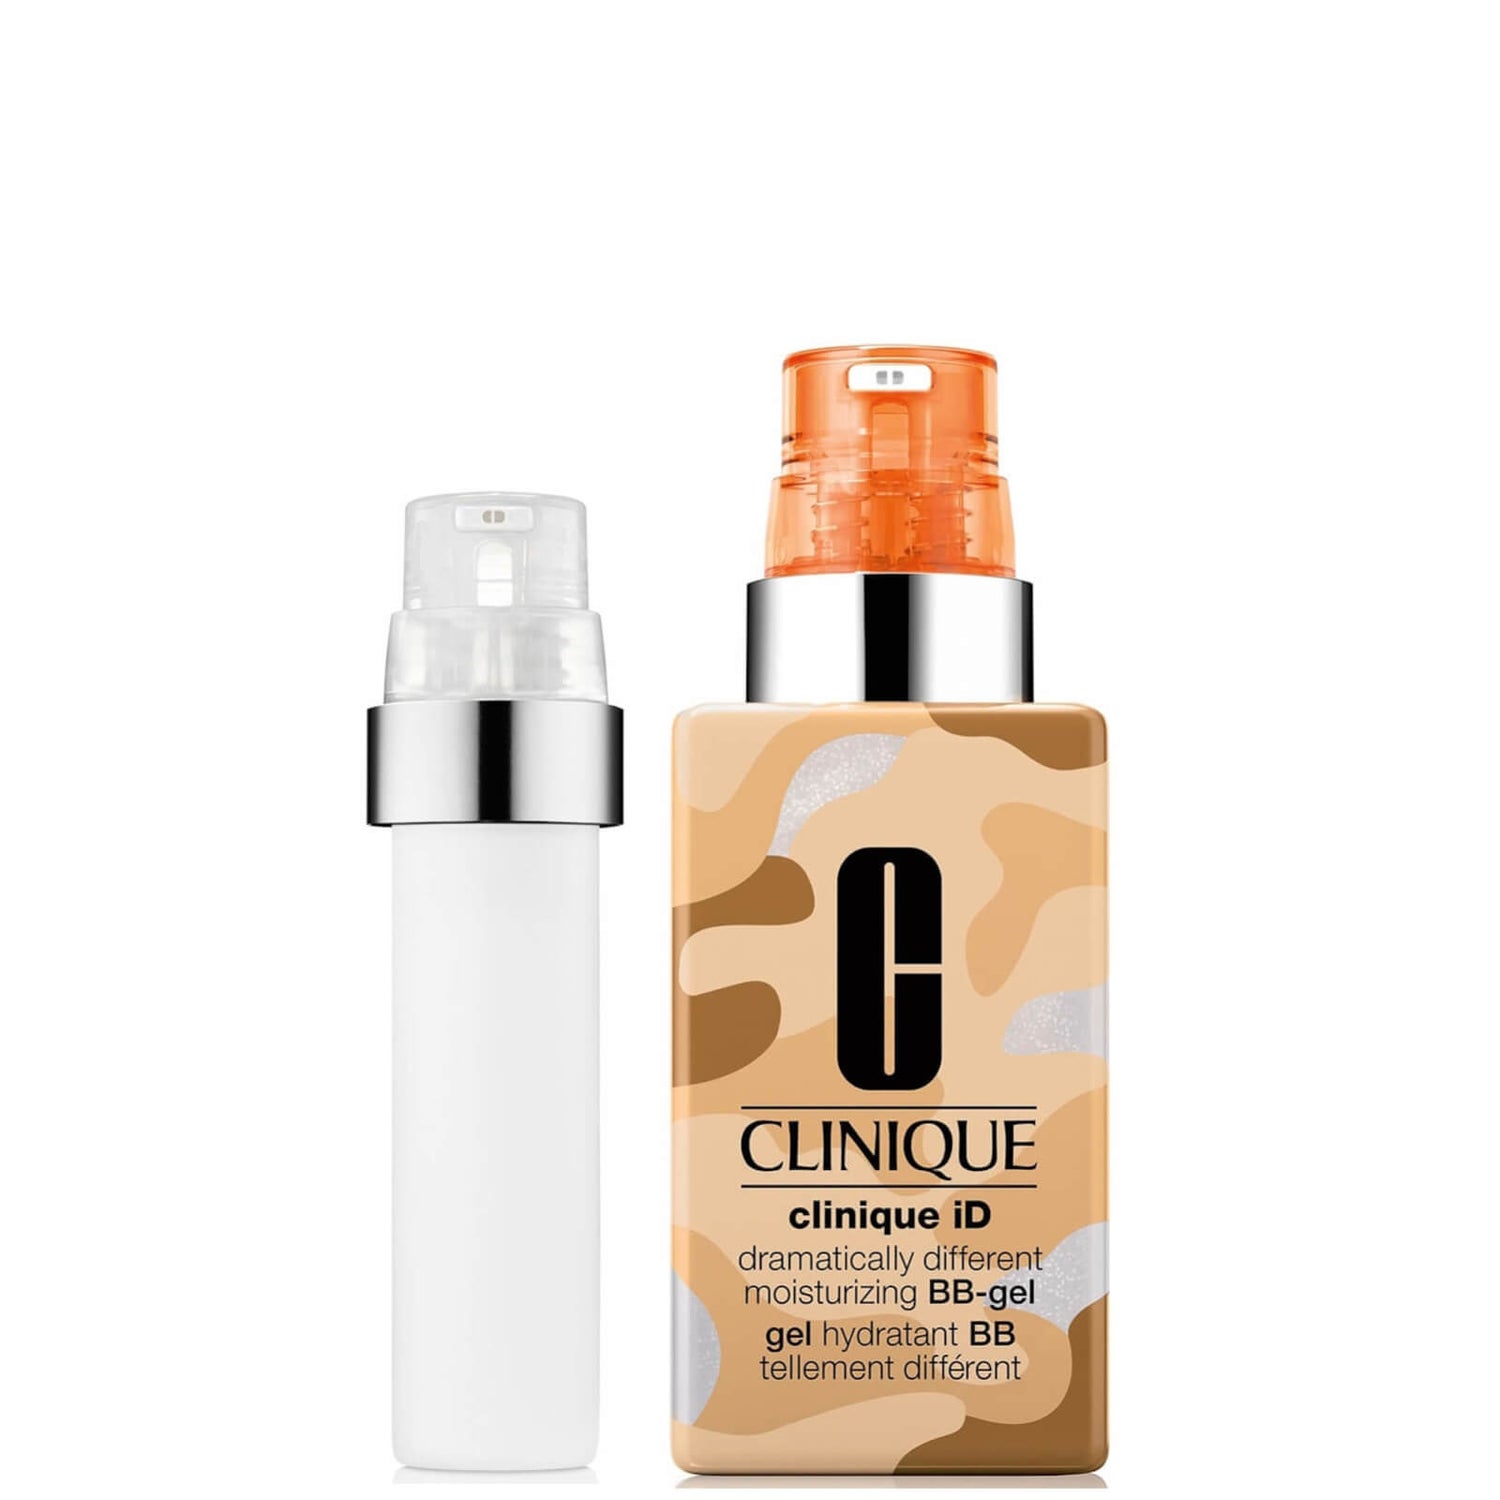 Clinique iD Dramatically Different Moisturising BB-Gel and Active Cartridge Concentrate for Uneven Skin Tone Bundle